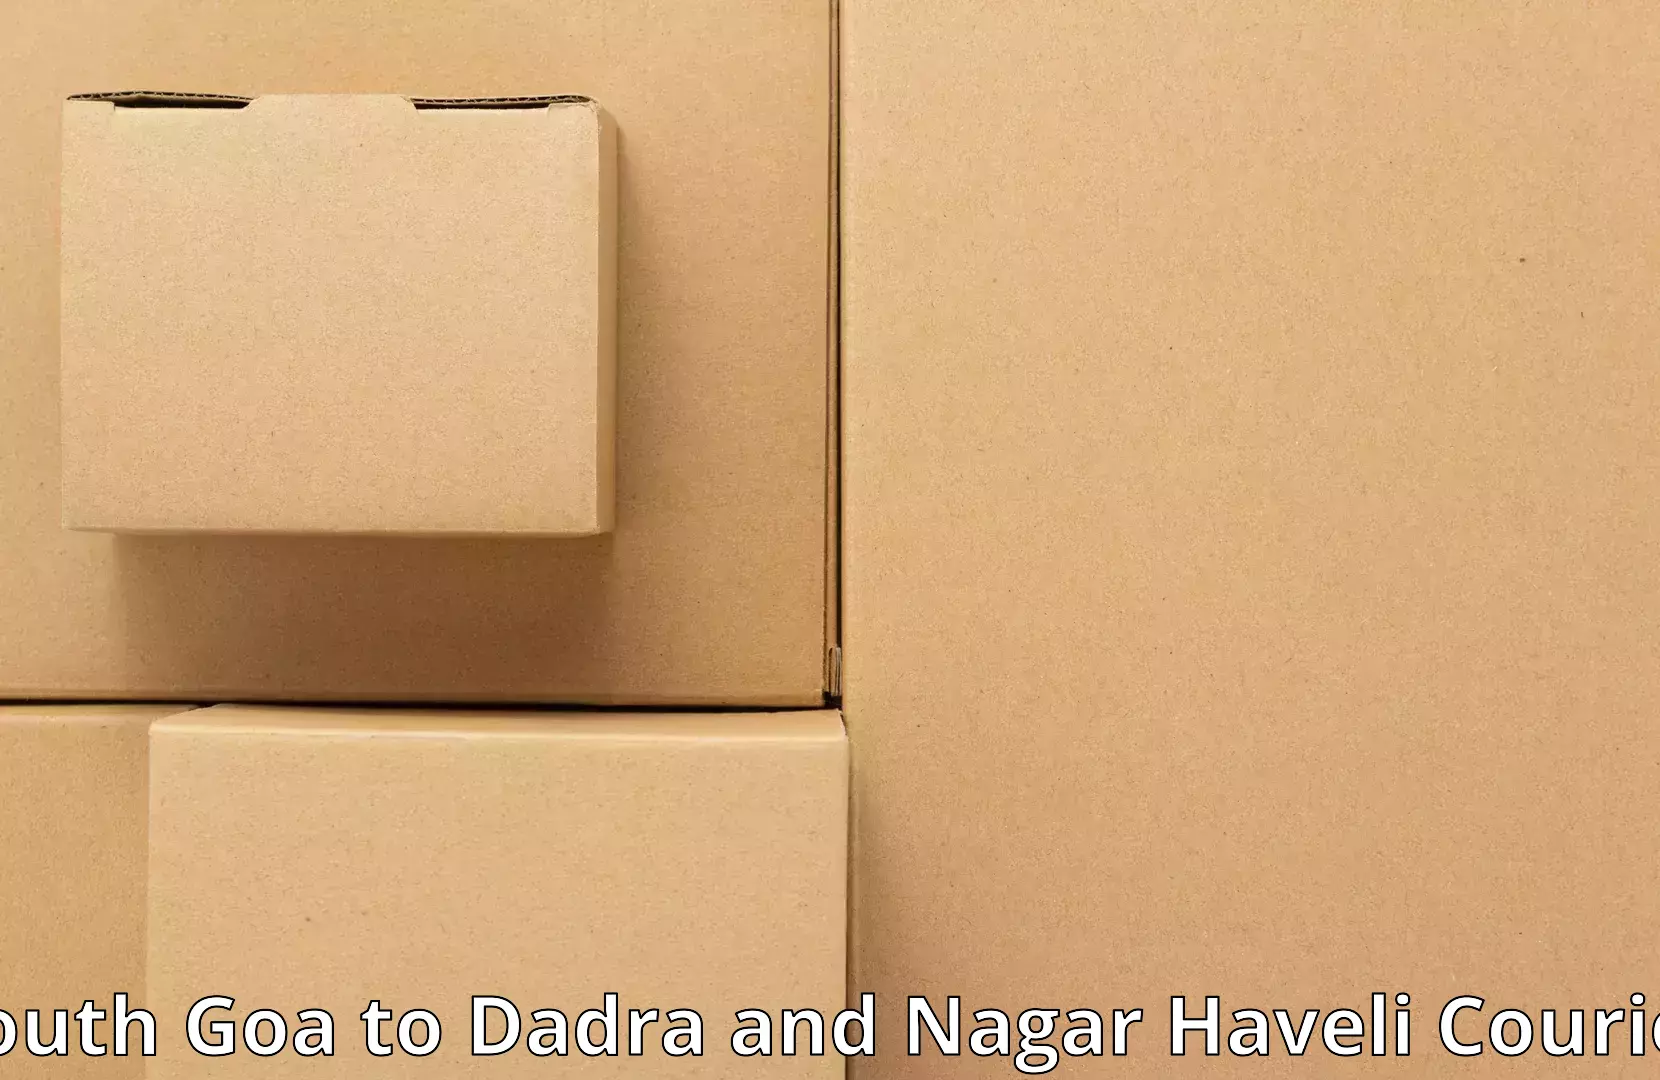 Personalized moving service South Goa to Dadra and Nagar Haveli